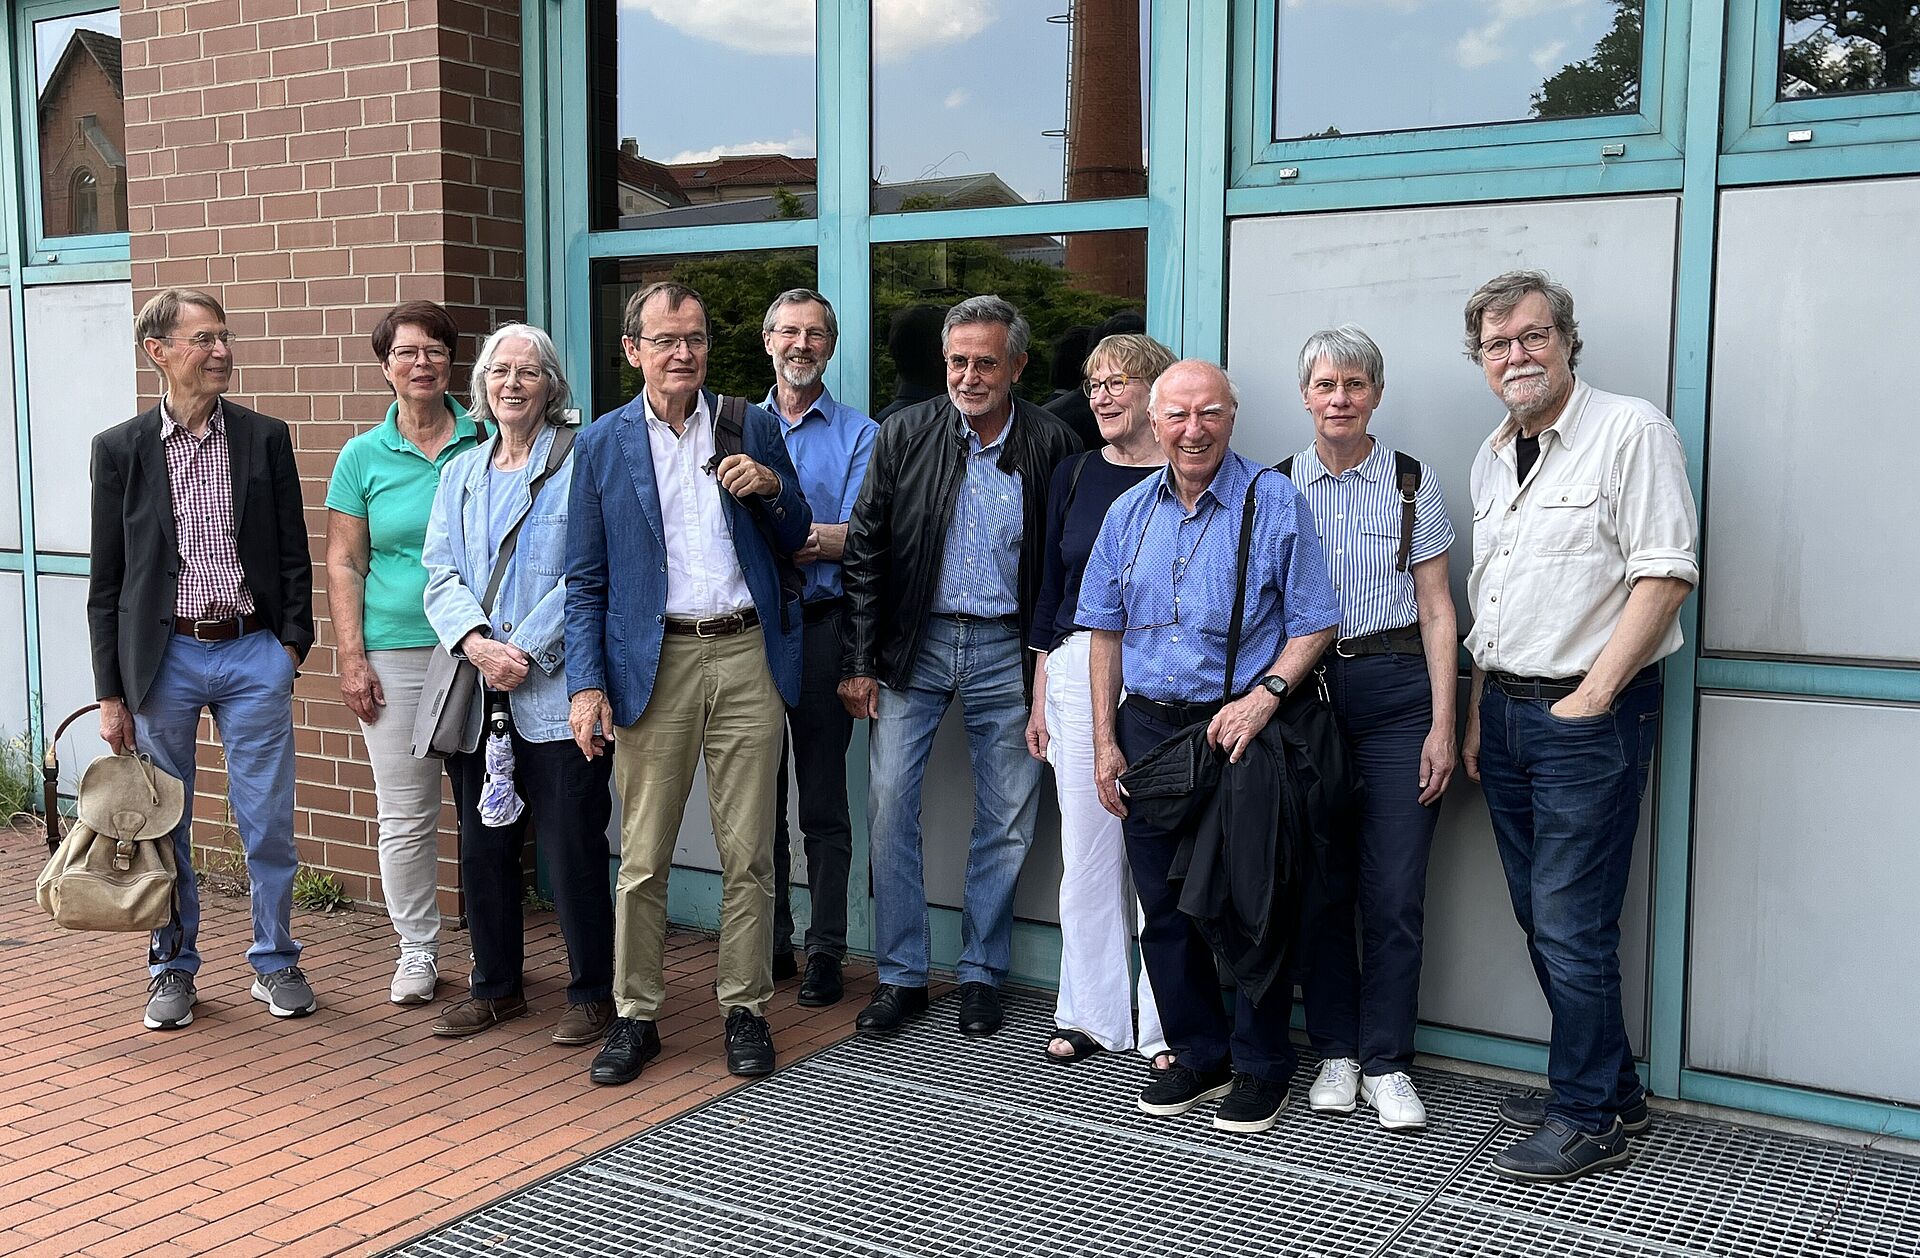 A fotograph showing Biotechnology alumni and Prof. Dr Stefan Dübel (right) in front of the biotechnology laboratory of the Department of Biotechnology at the Institute of Biochemistry, Biotechnology and Bioinformatics on 8 June 2024